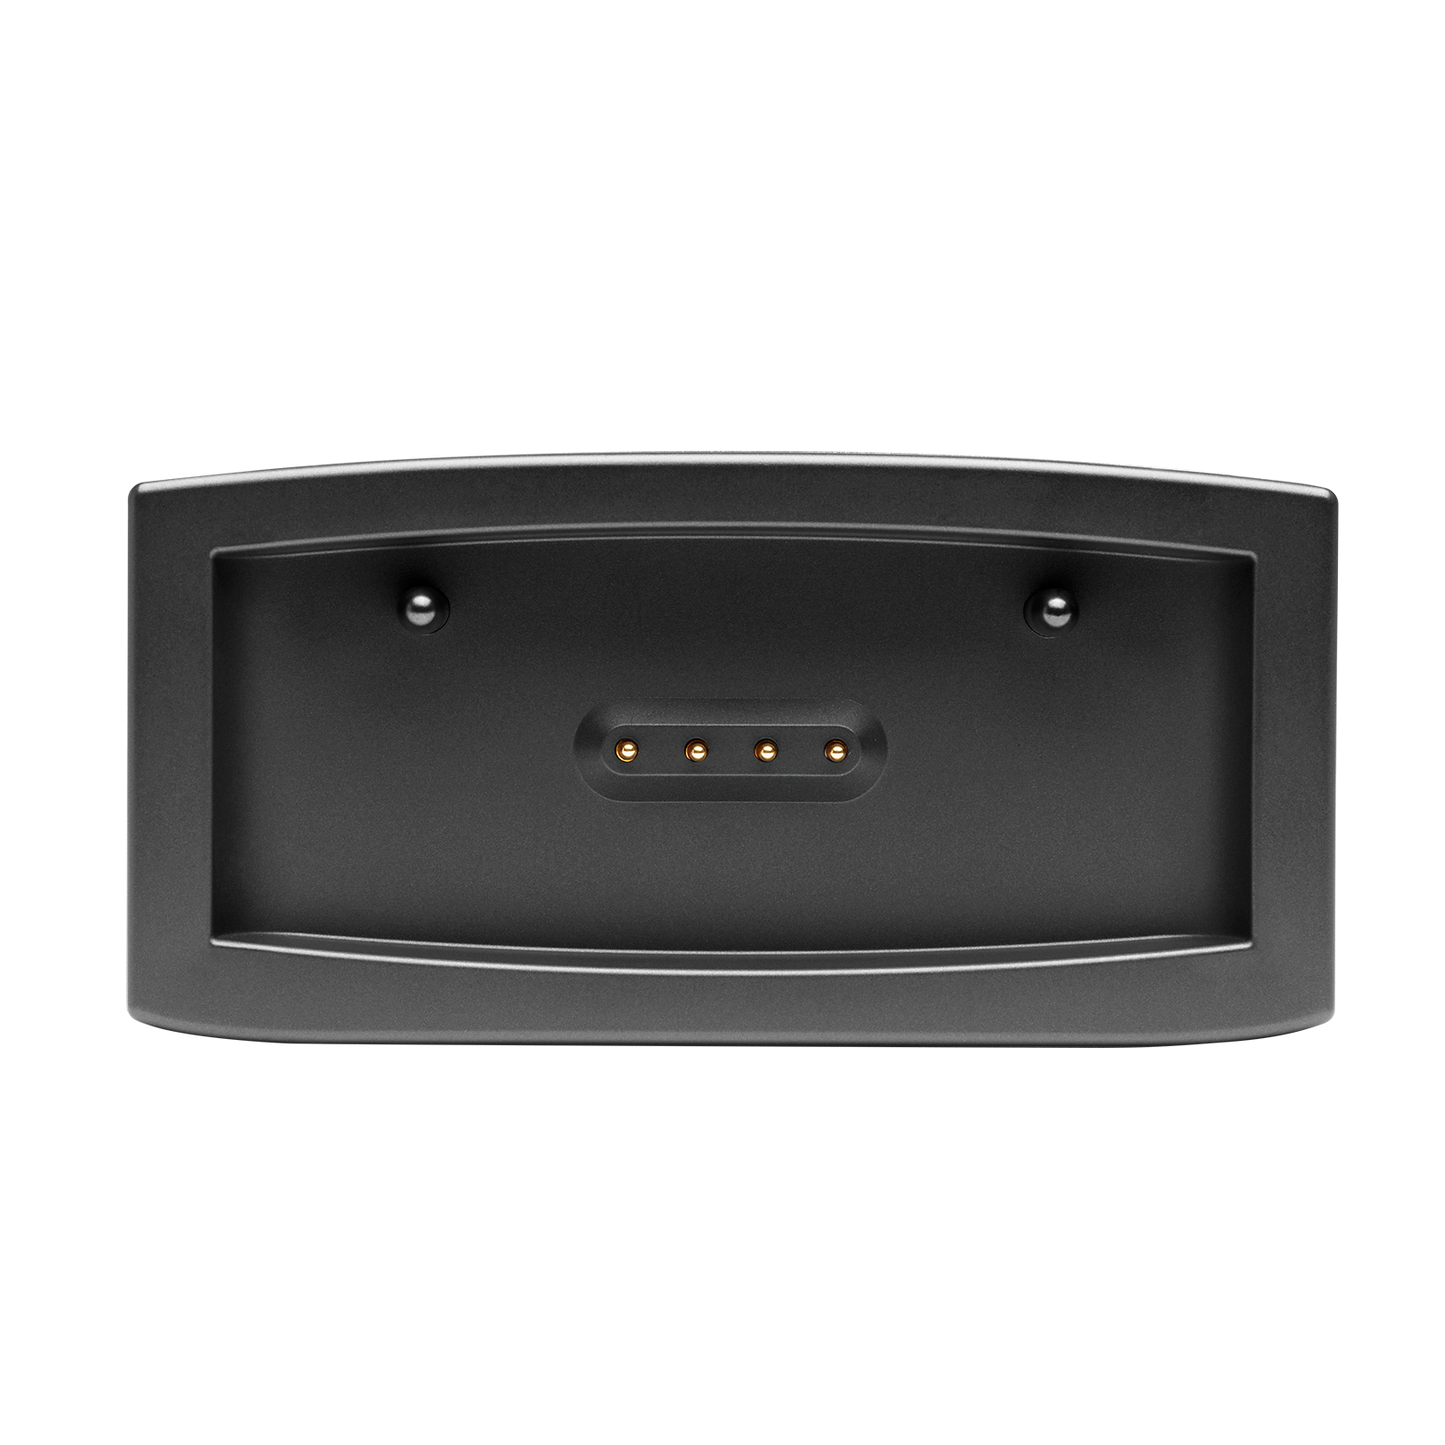 JBL BAR 9.1 True Wireless Surround with Dolby Atmos-JBL-computerspace